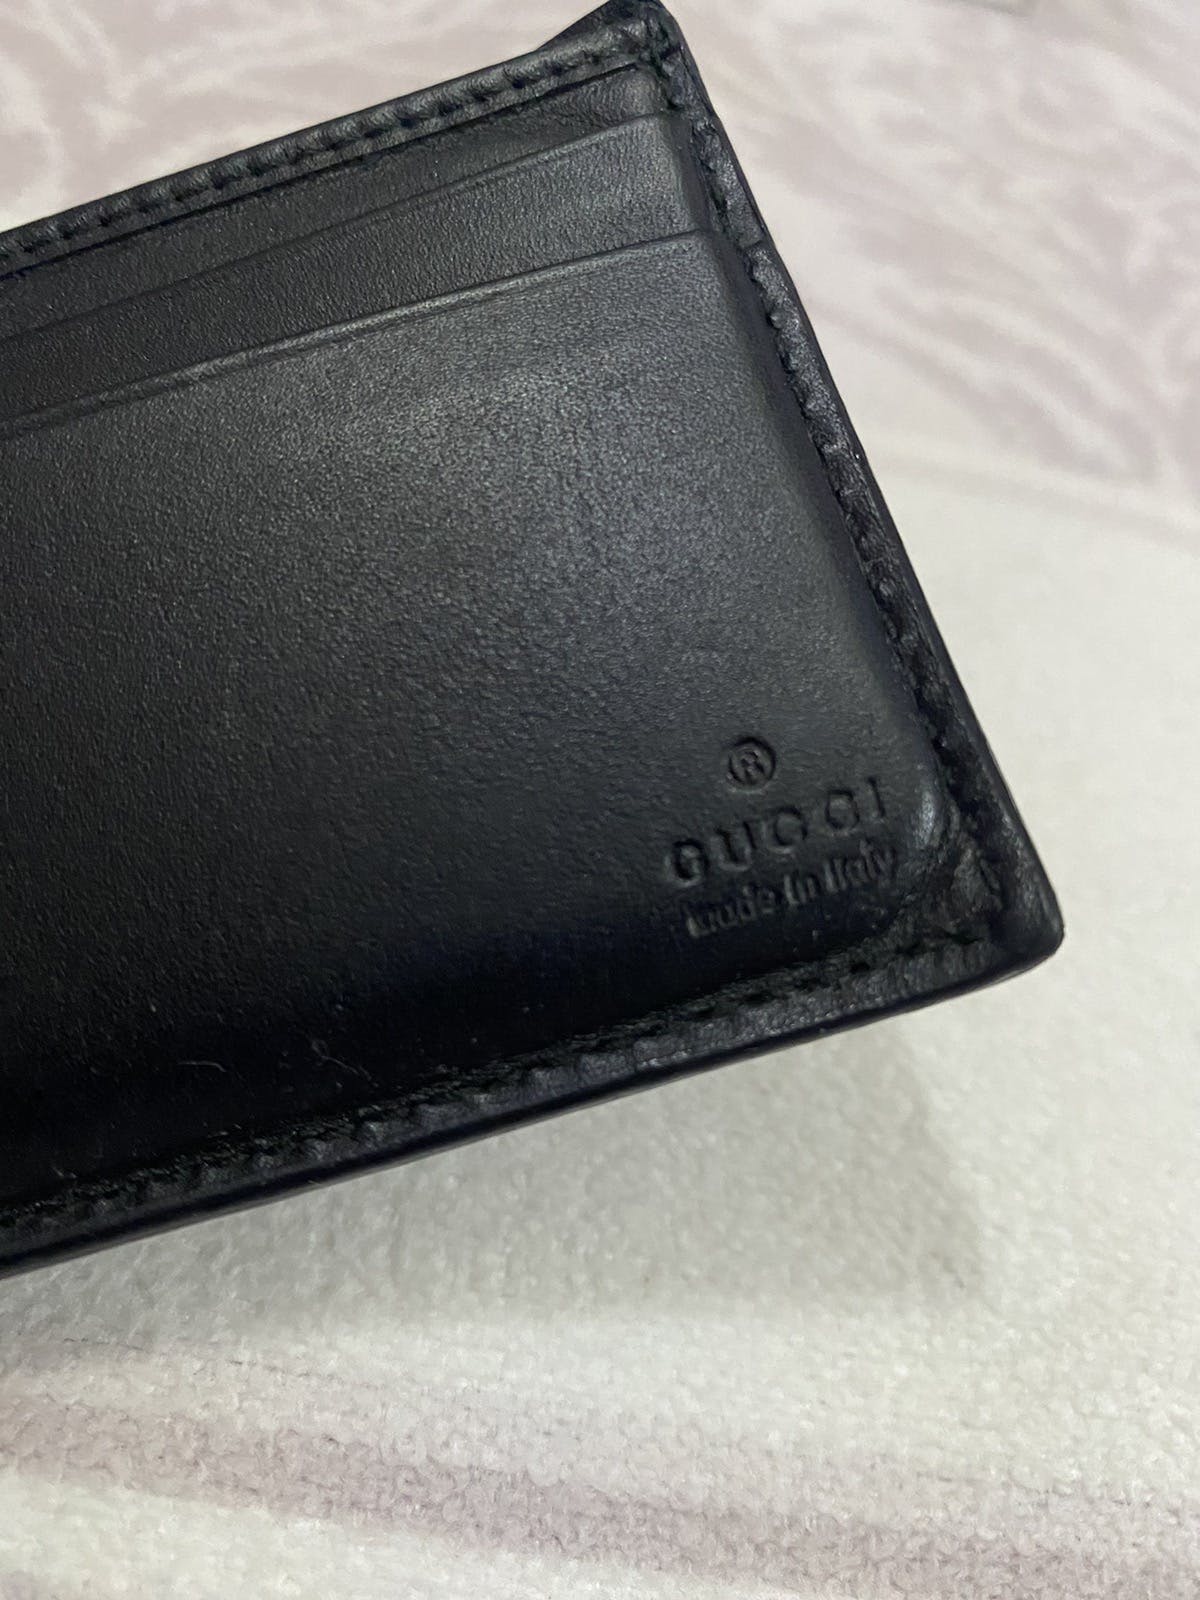 Authentic Gucci Snake Wallet - 7